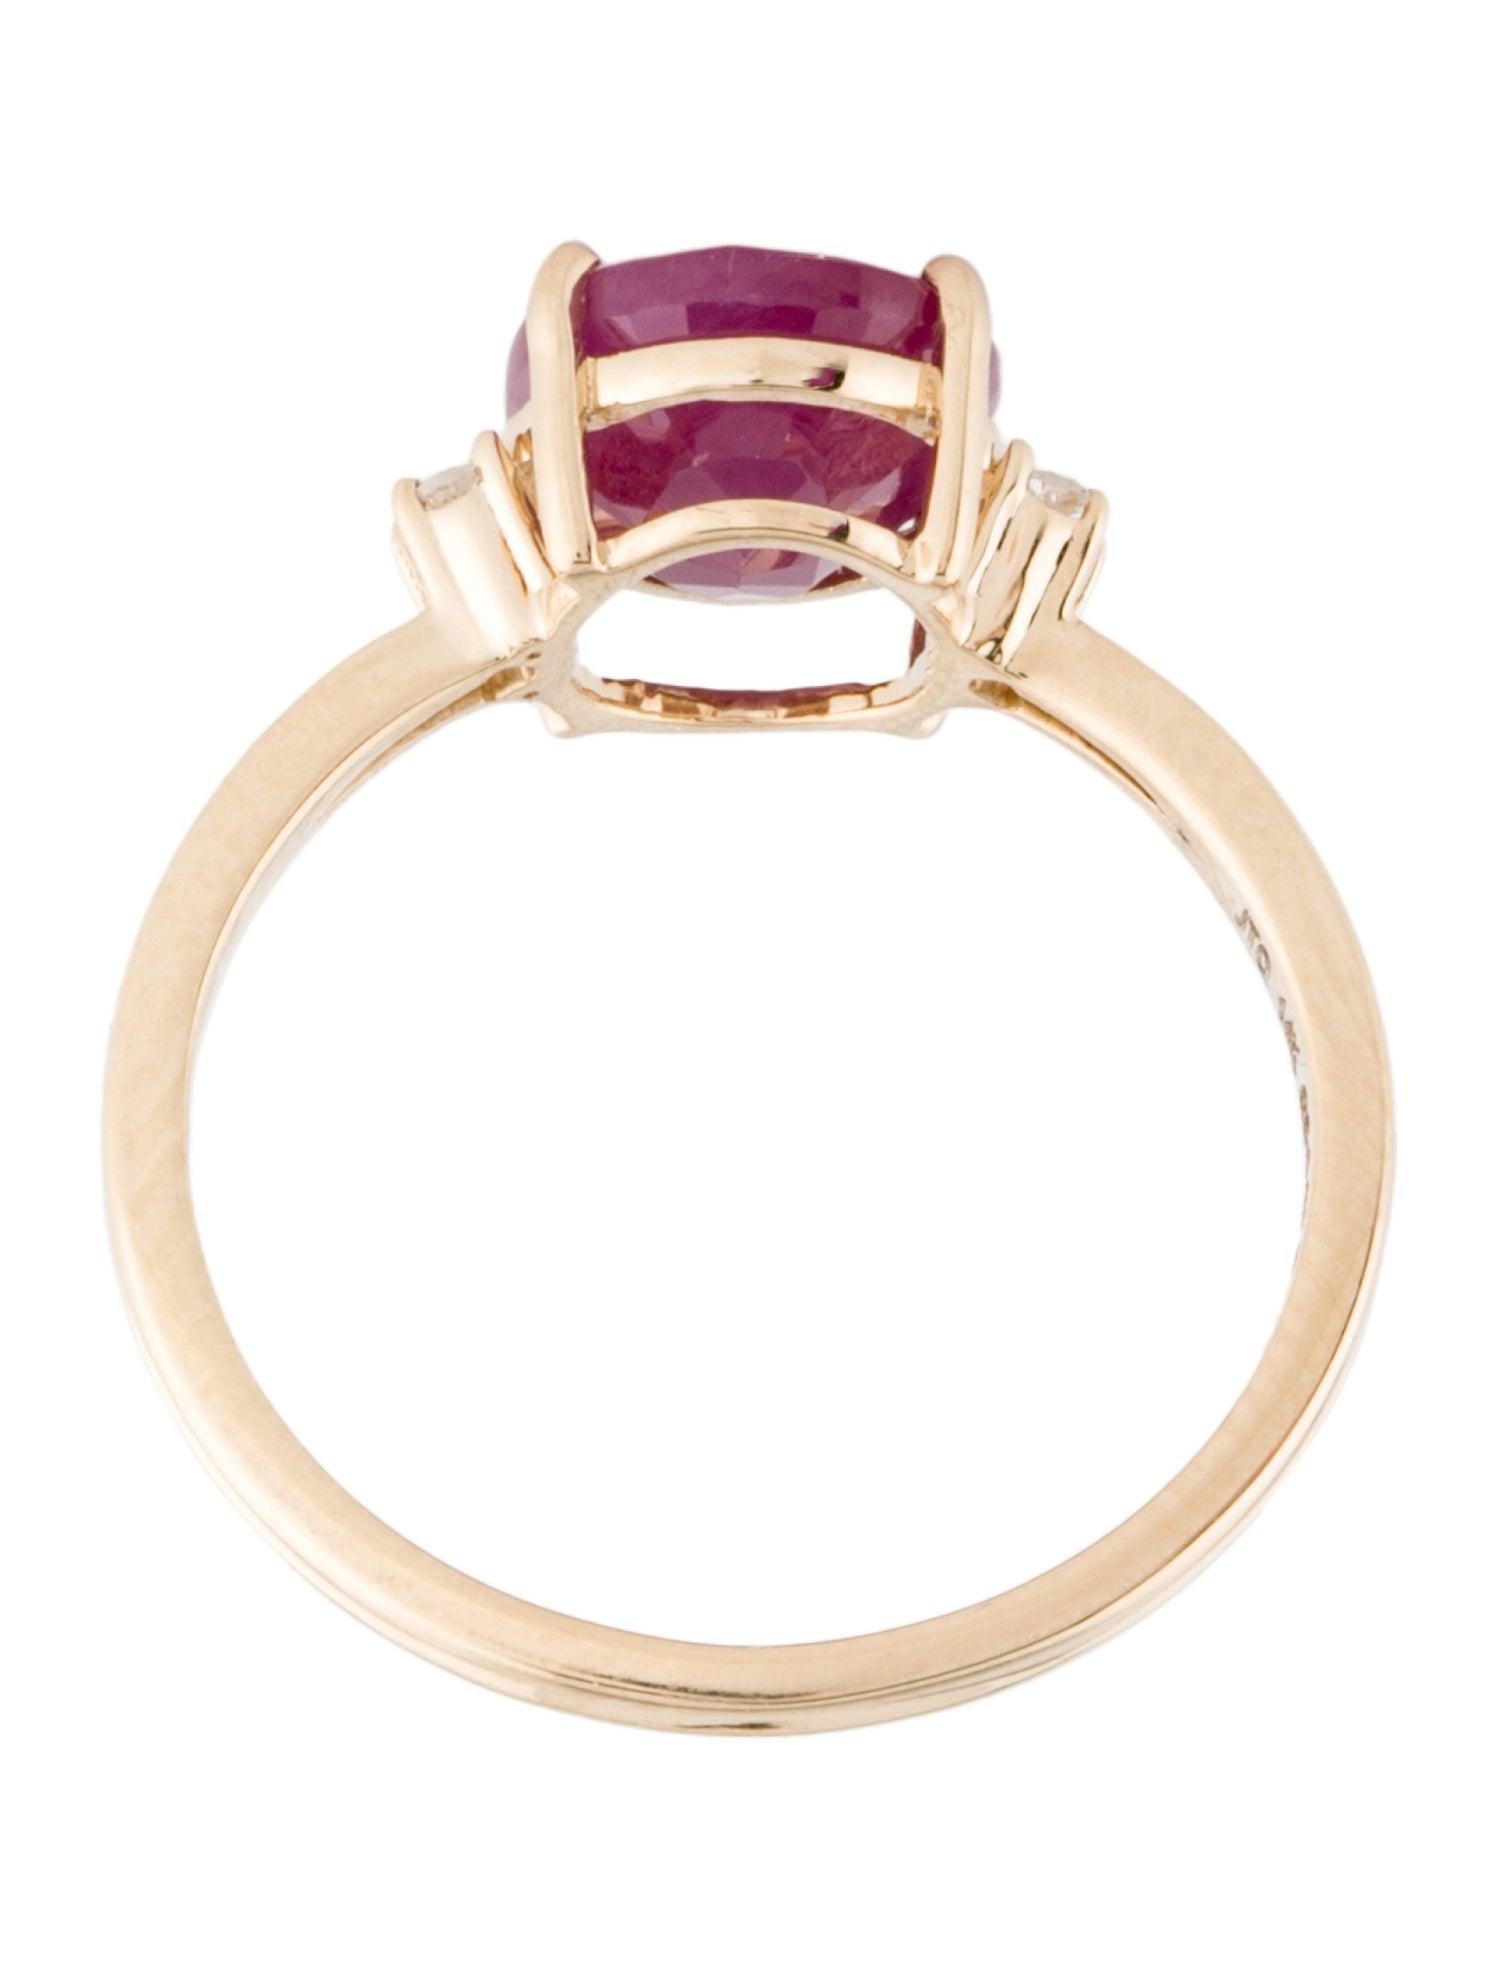 Dazzling 14K Gold 2.68ct Ruby & Diamond Cocktail Ring - Size 7 - Fine Gemstone In New Condition For Sale In Holtsville, NY